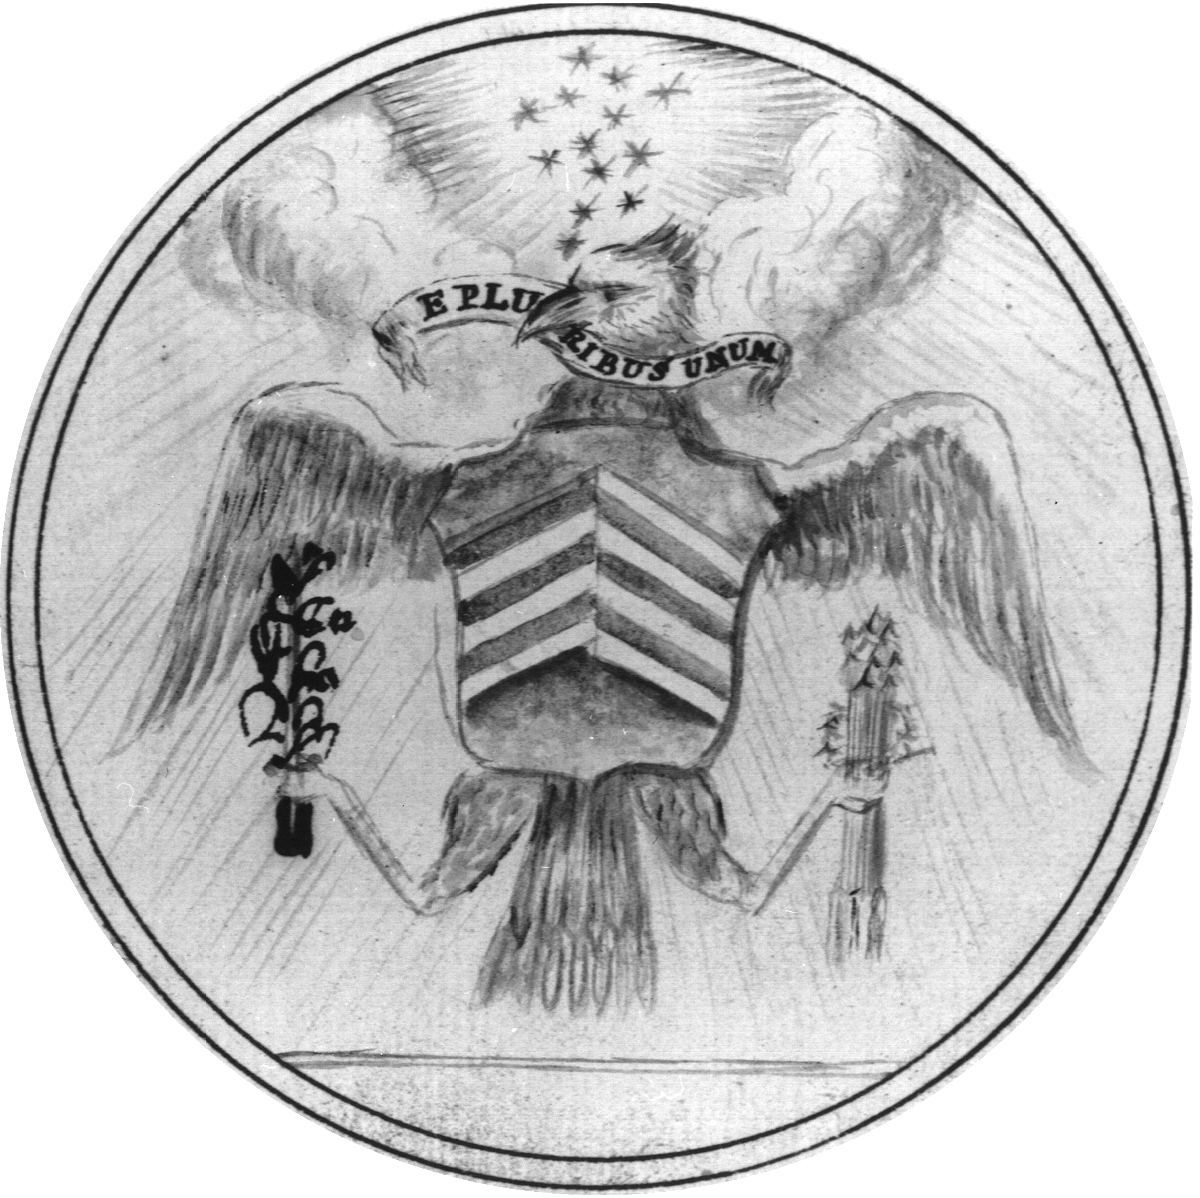 The Obverse of the Great Seal